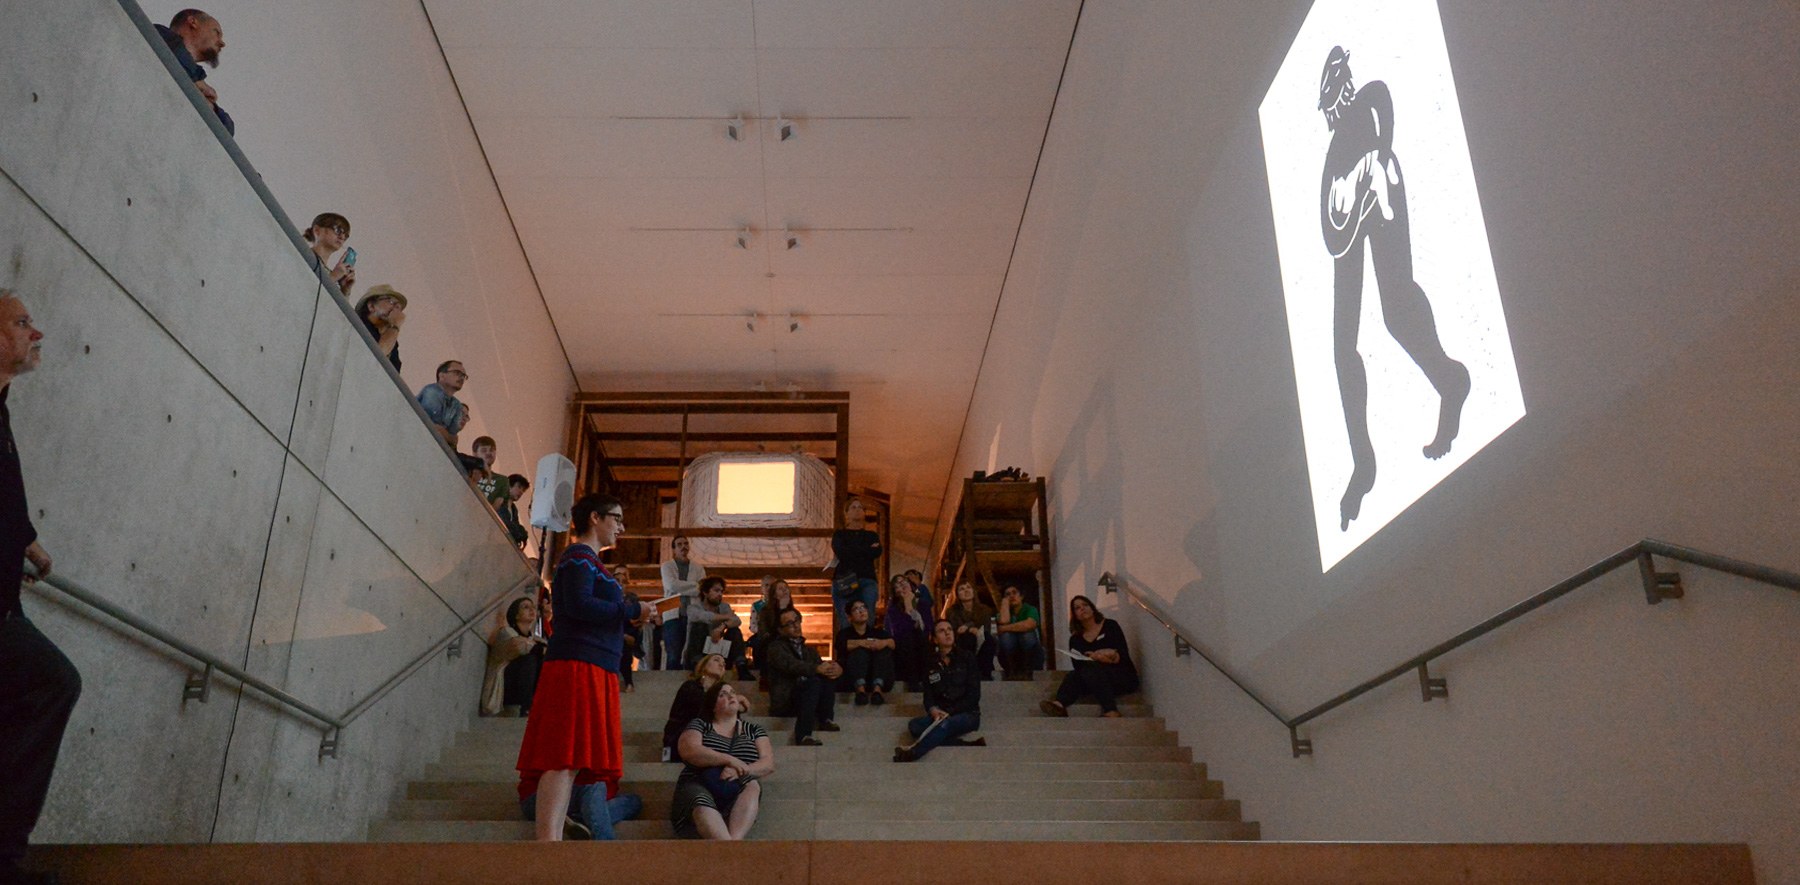 Marnie Galloway reads on the Main Staircase from her zine "Burrow" facing one of her illustrations projected on the wall.